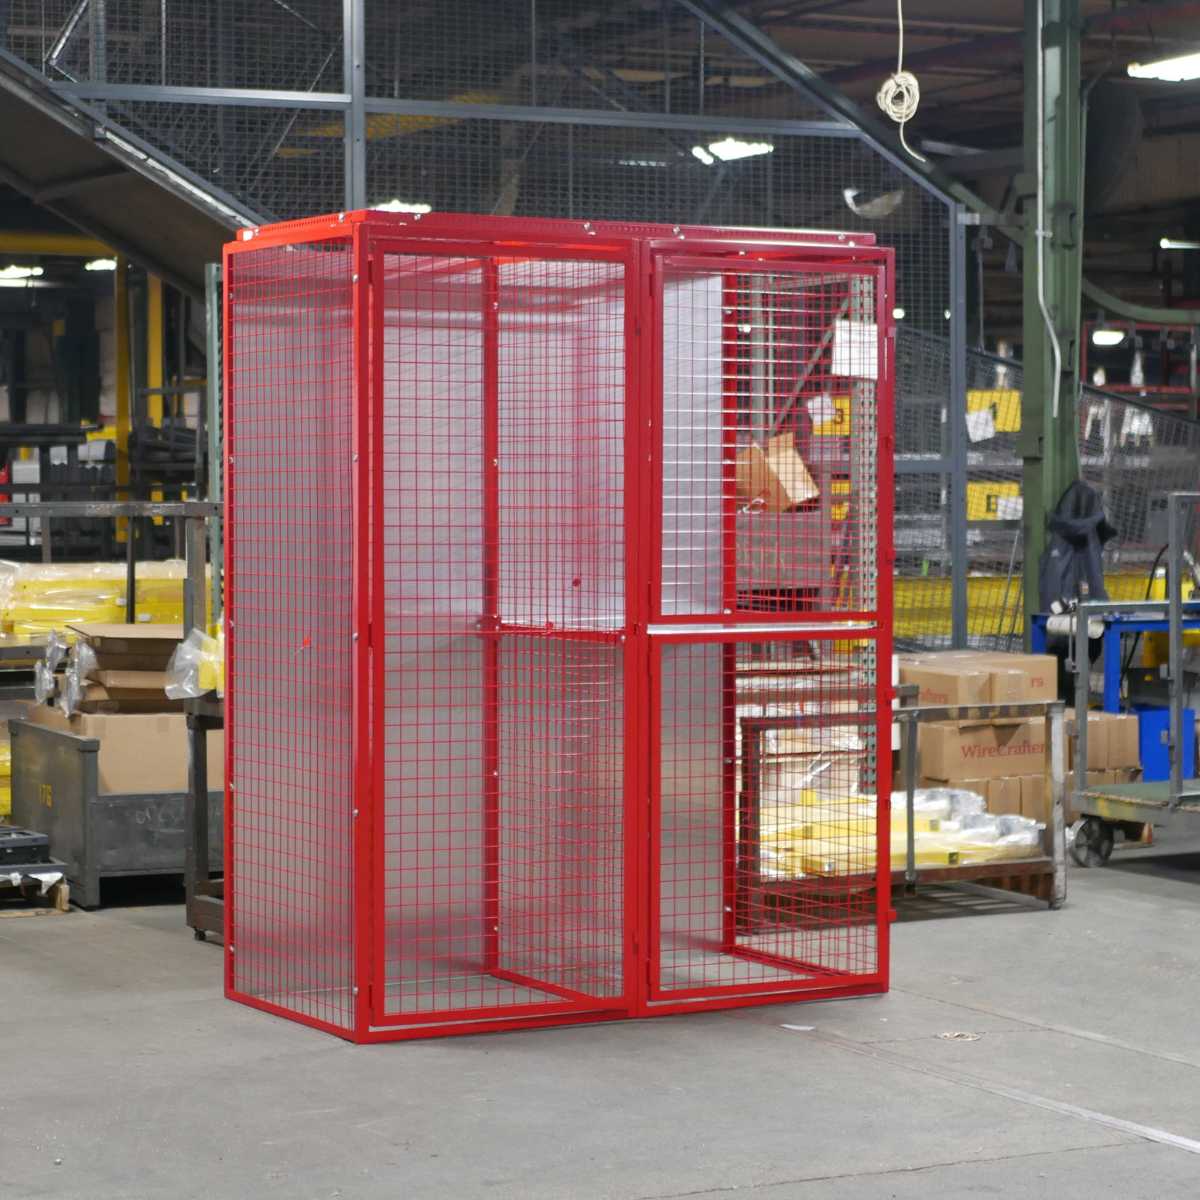 red wire mesh locker with doors closed